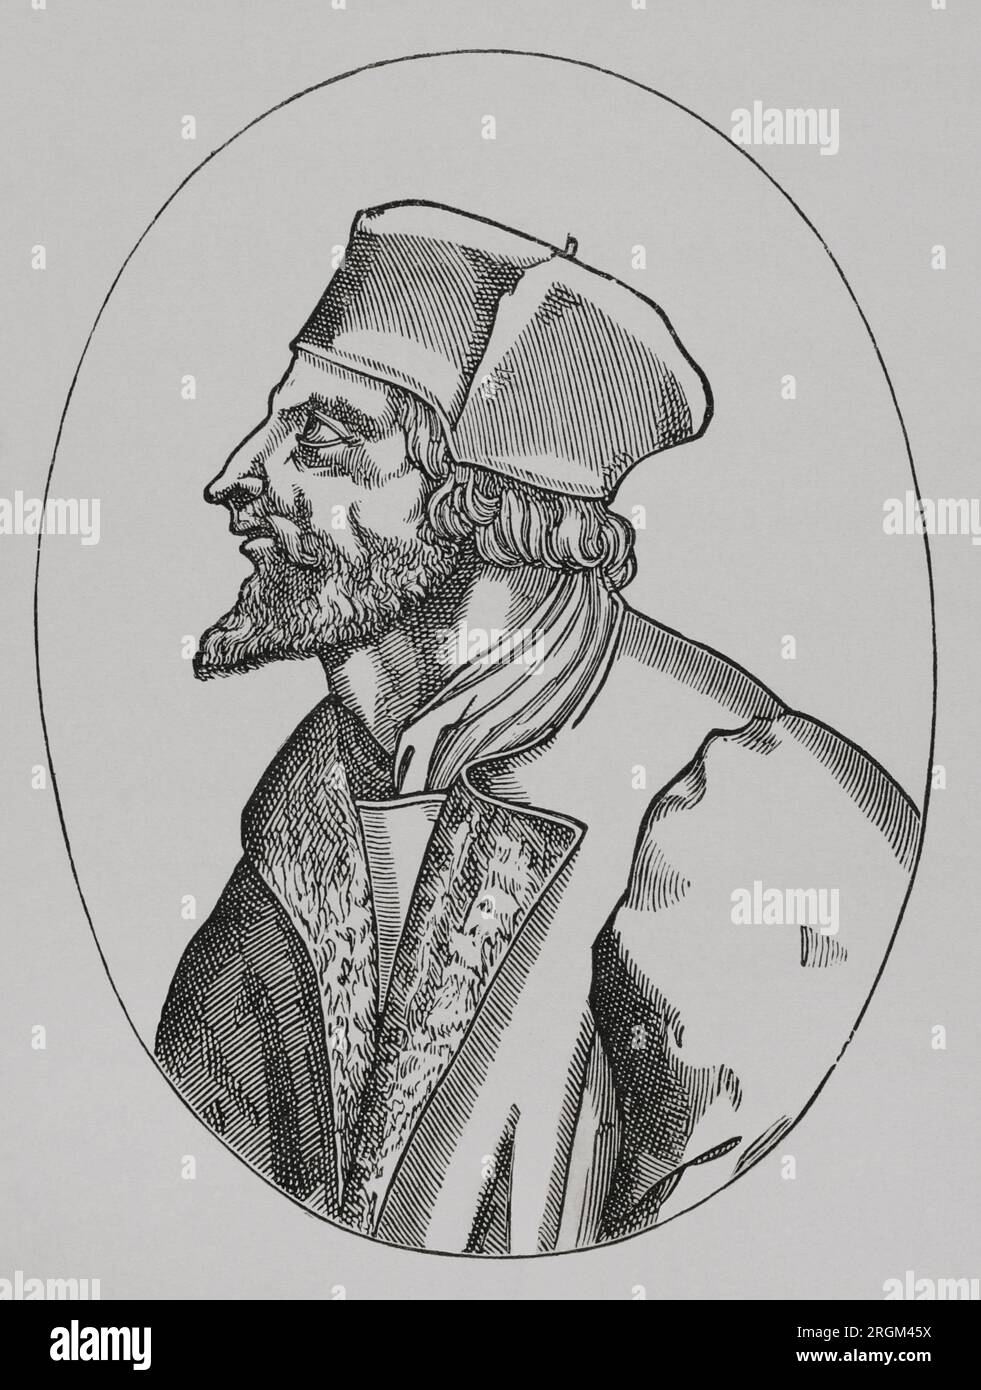 Jan Hus (1369-1415). Czech theologian and philosopher. Reformer excommunicated in 1410 for propagating the doctrines of Wycliffe. In 1414 he attended the Council of Constance, where he was tried and condemned to the stake as a heretic. This unleashed the Hussite uprising (1419-1434), antecedent of the Wars of Religion. Portrait. Engraving. 'Vie Militaire et Religieuse au Moyen Age et à l'Epoque de la Renaissance'. Paris, 1877. Stock Photo